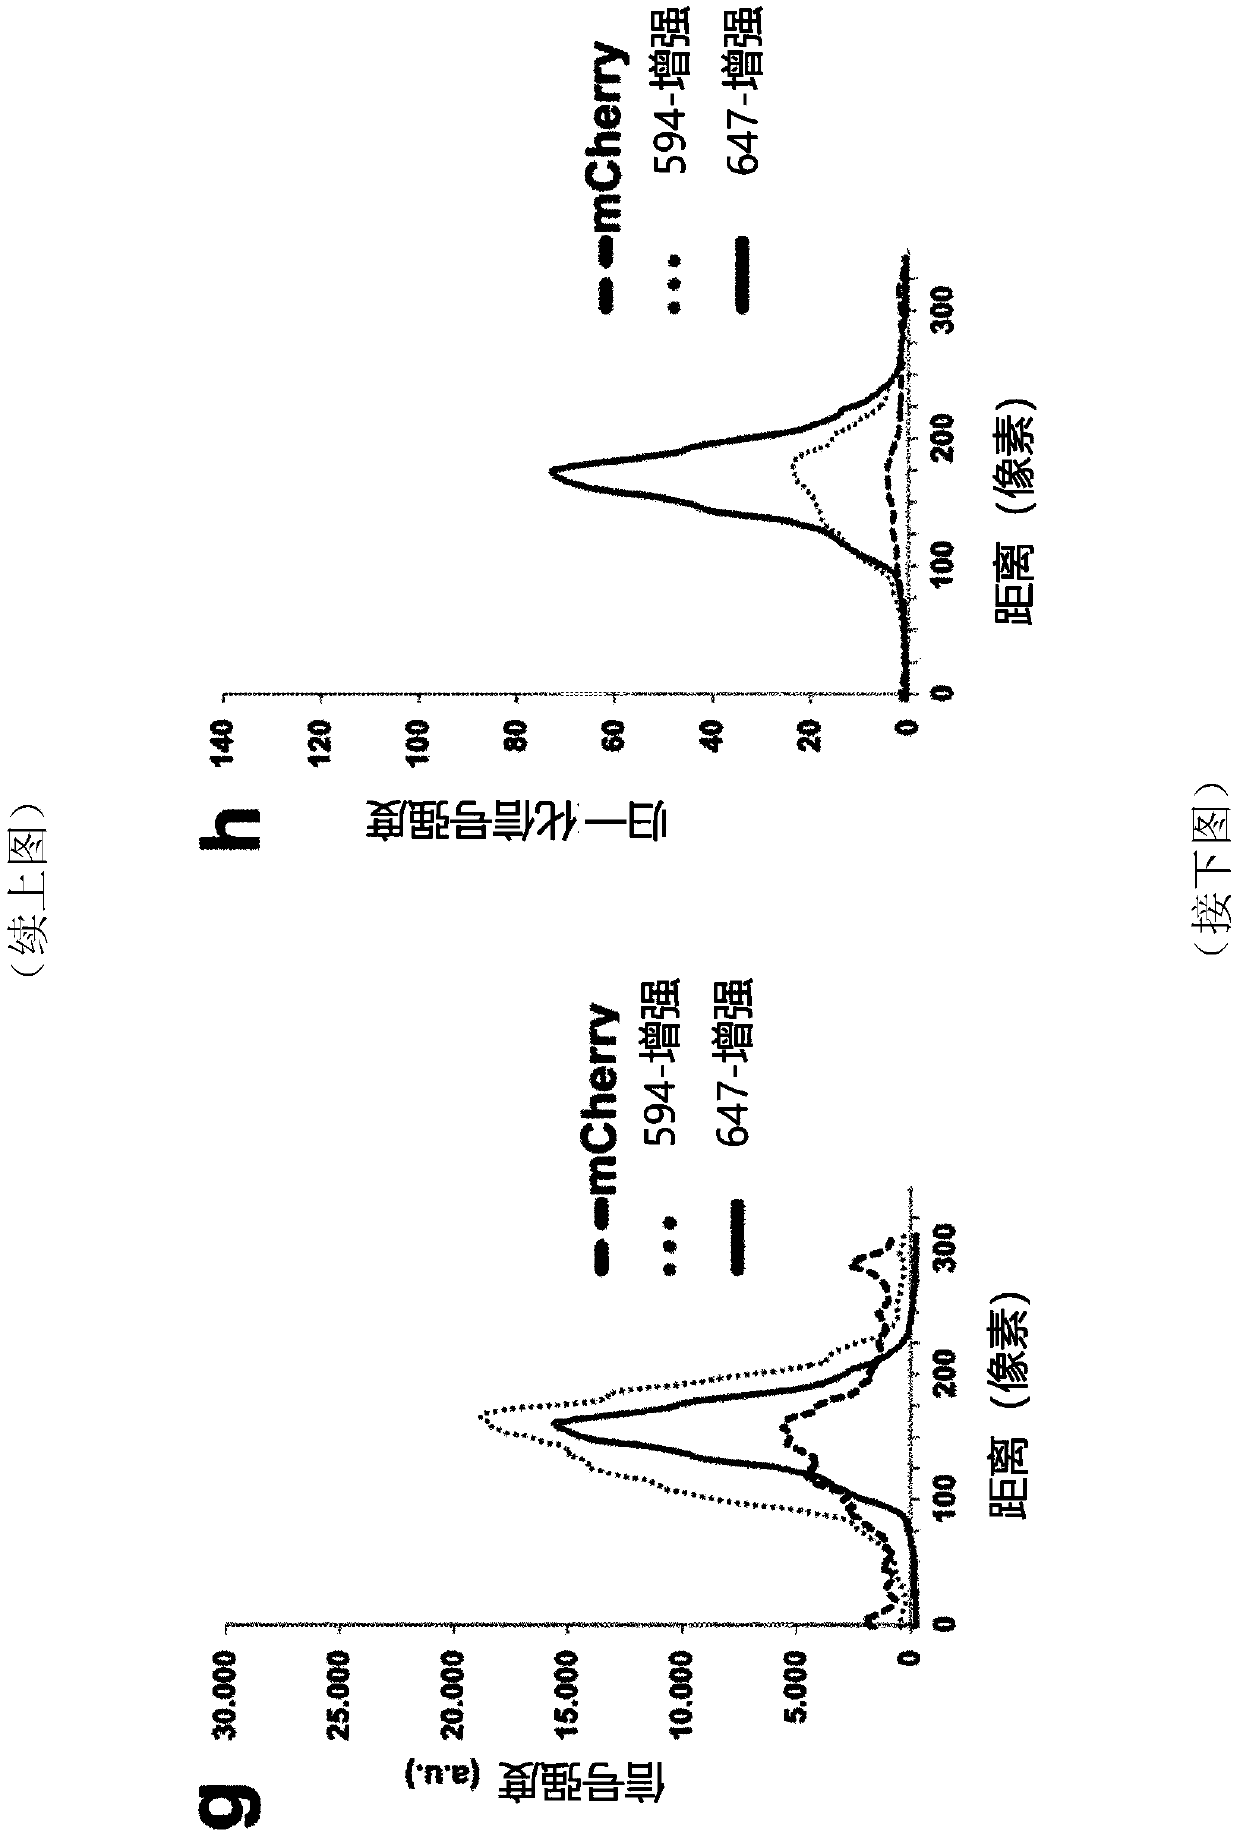 Methods for large tissue labeling, clearing and imaging